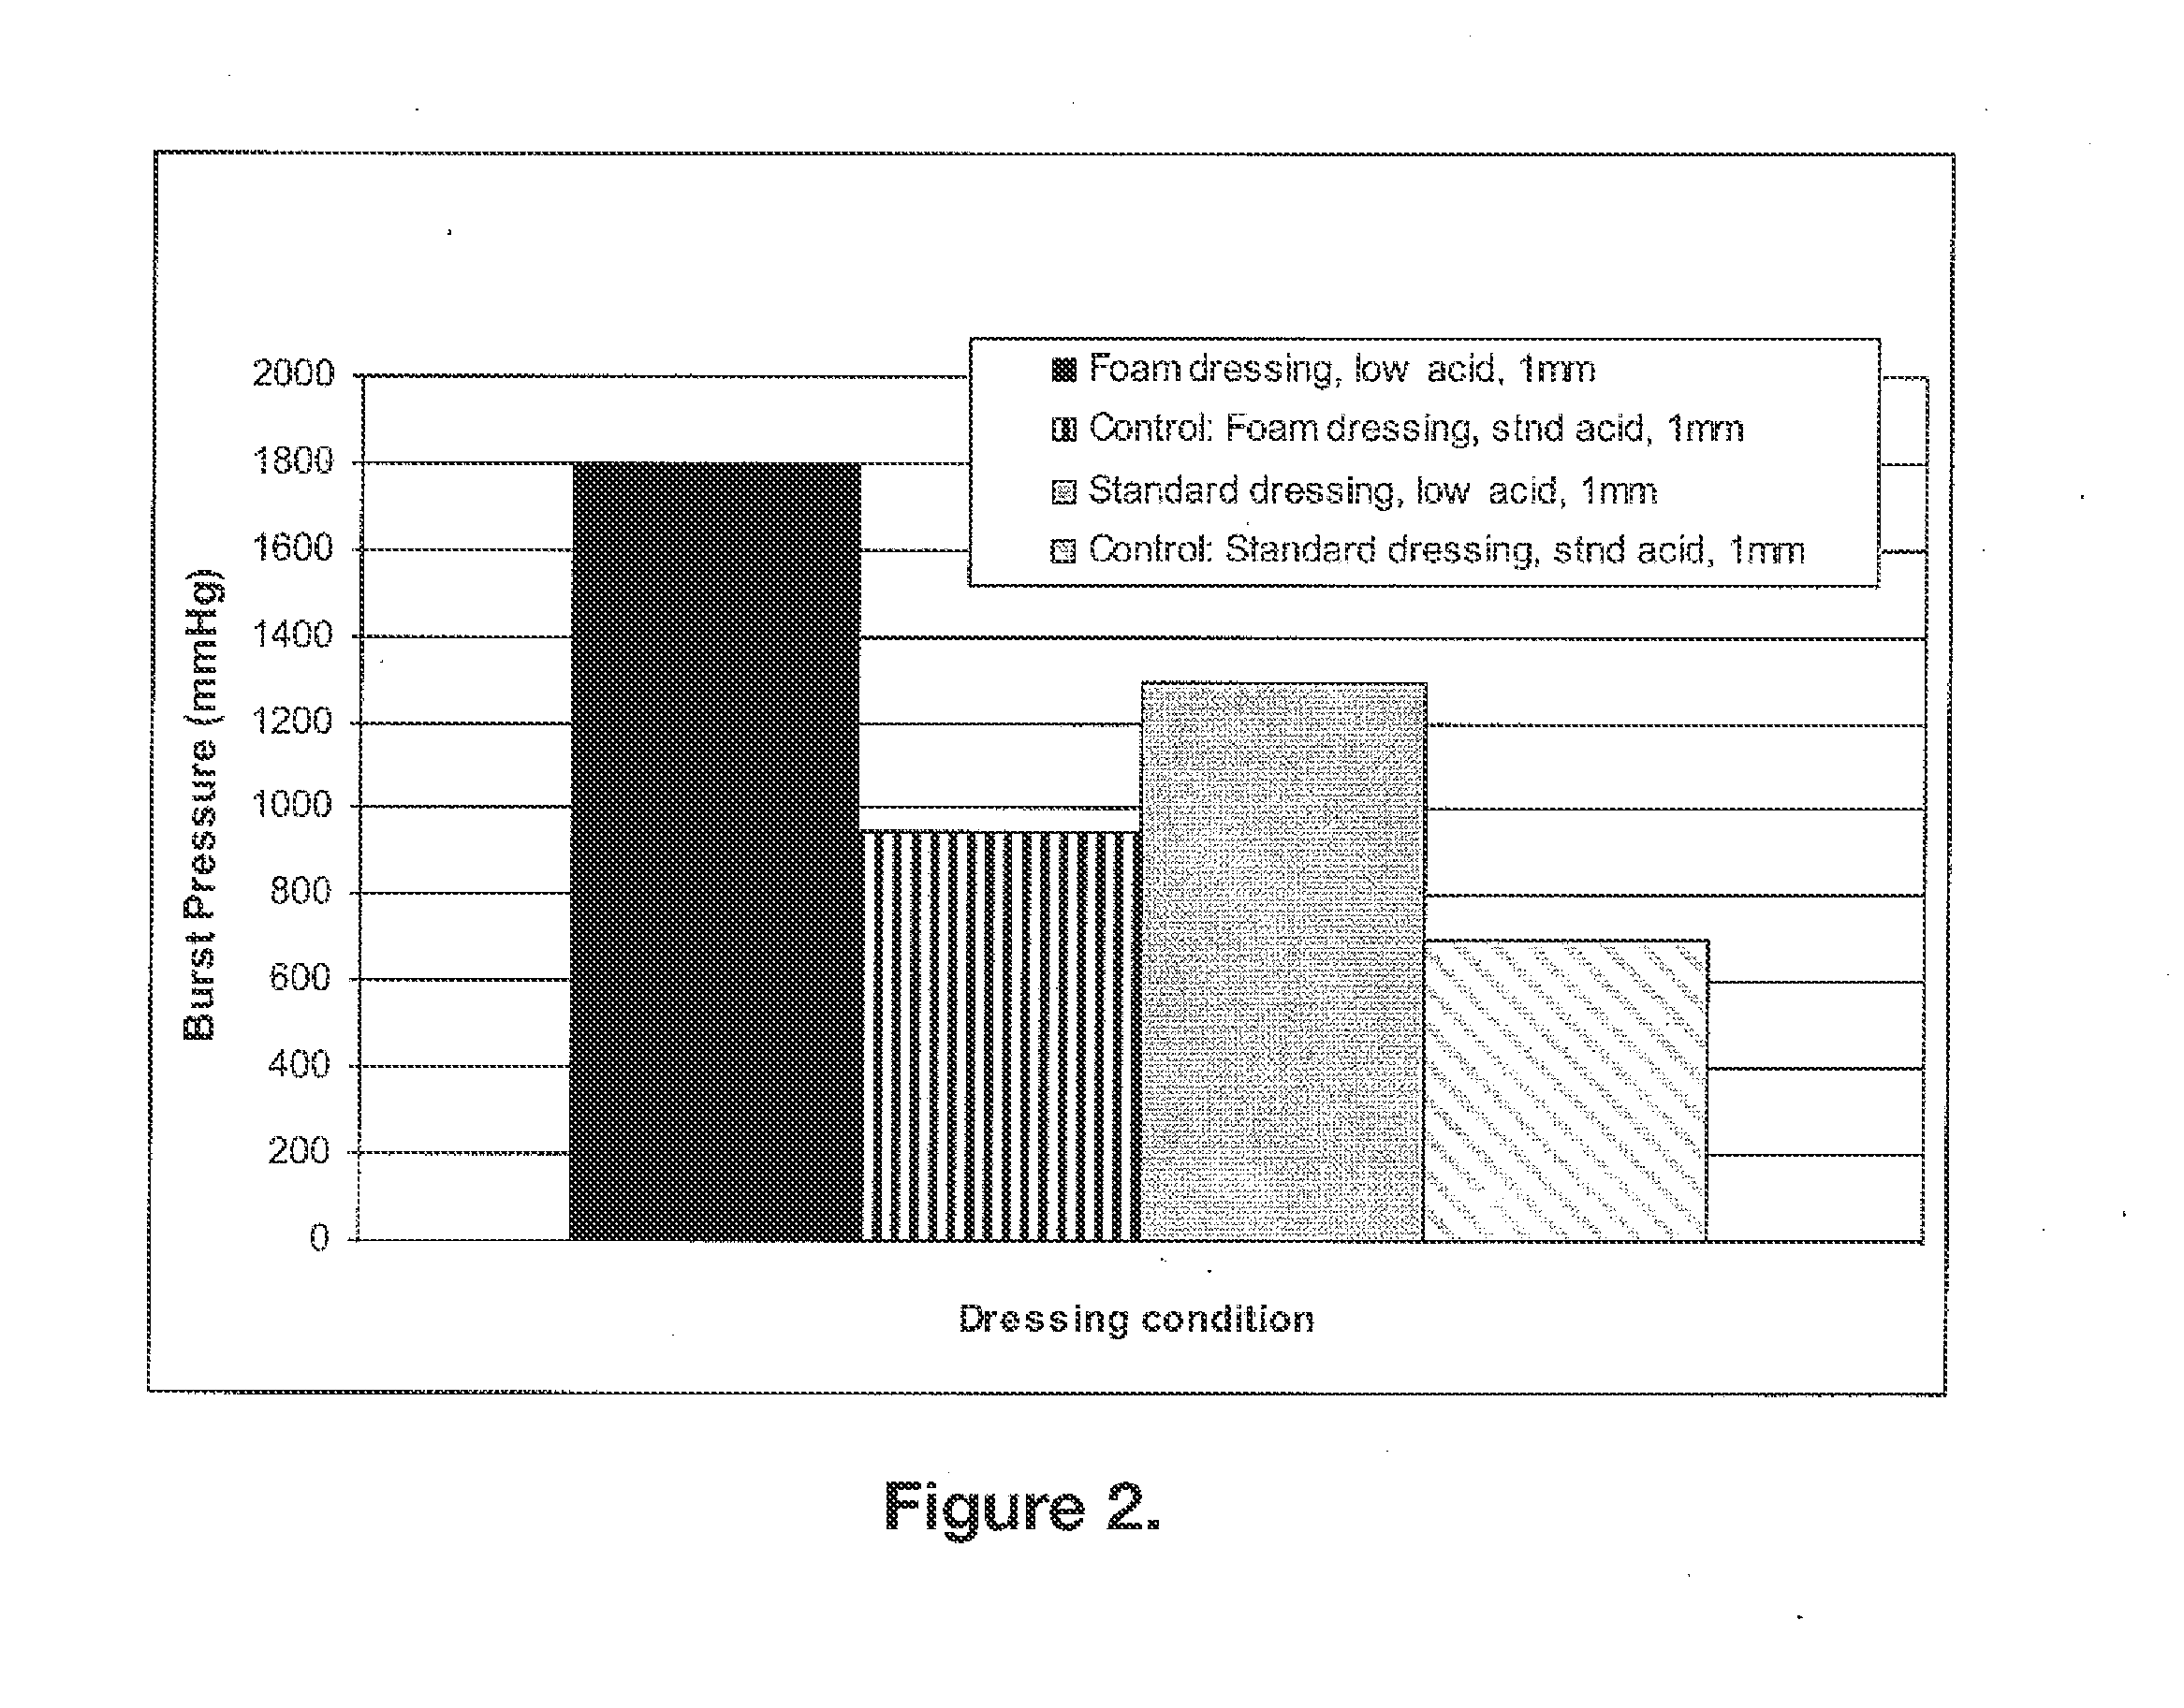 Biocompatible and bioabsorbable derivatized chitosan compositions